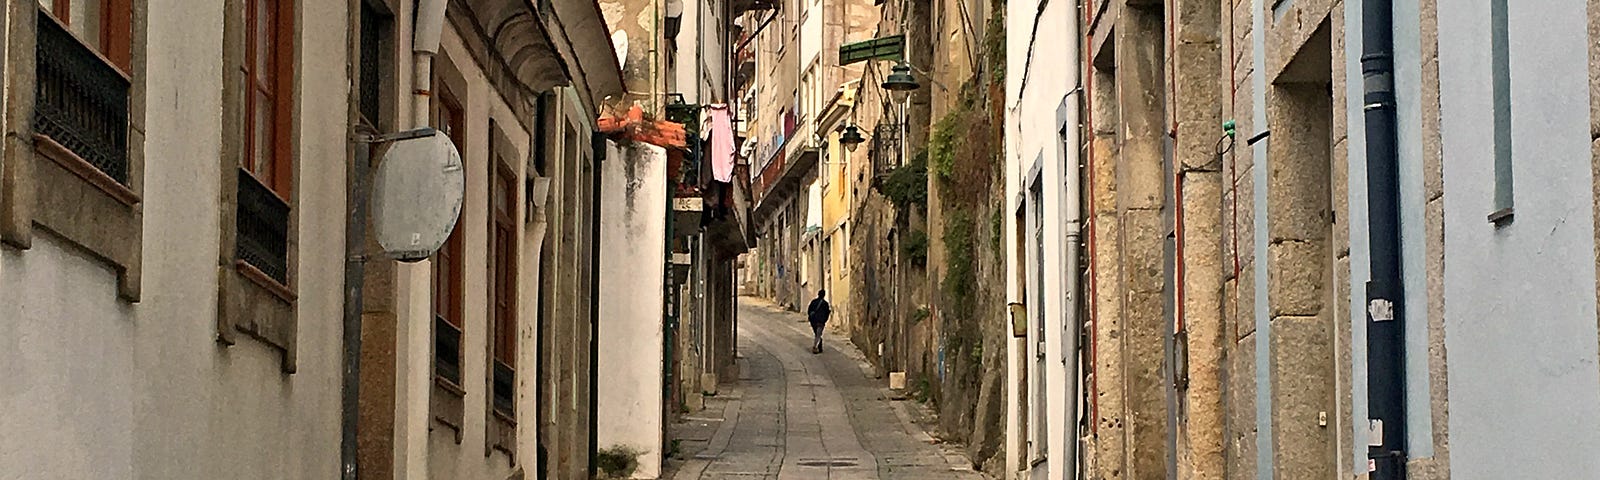 A beautiful street, narrow, with cobblestones, in N. Portugal. white-washed buildings.